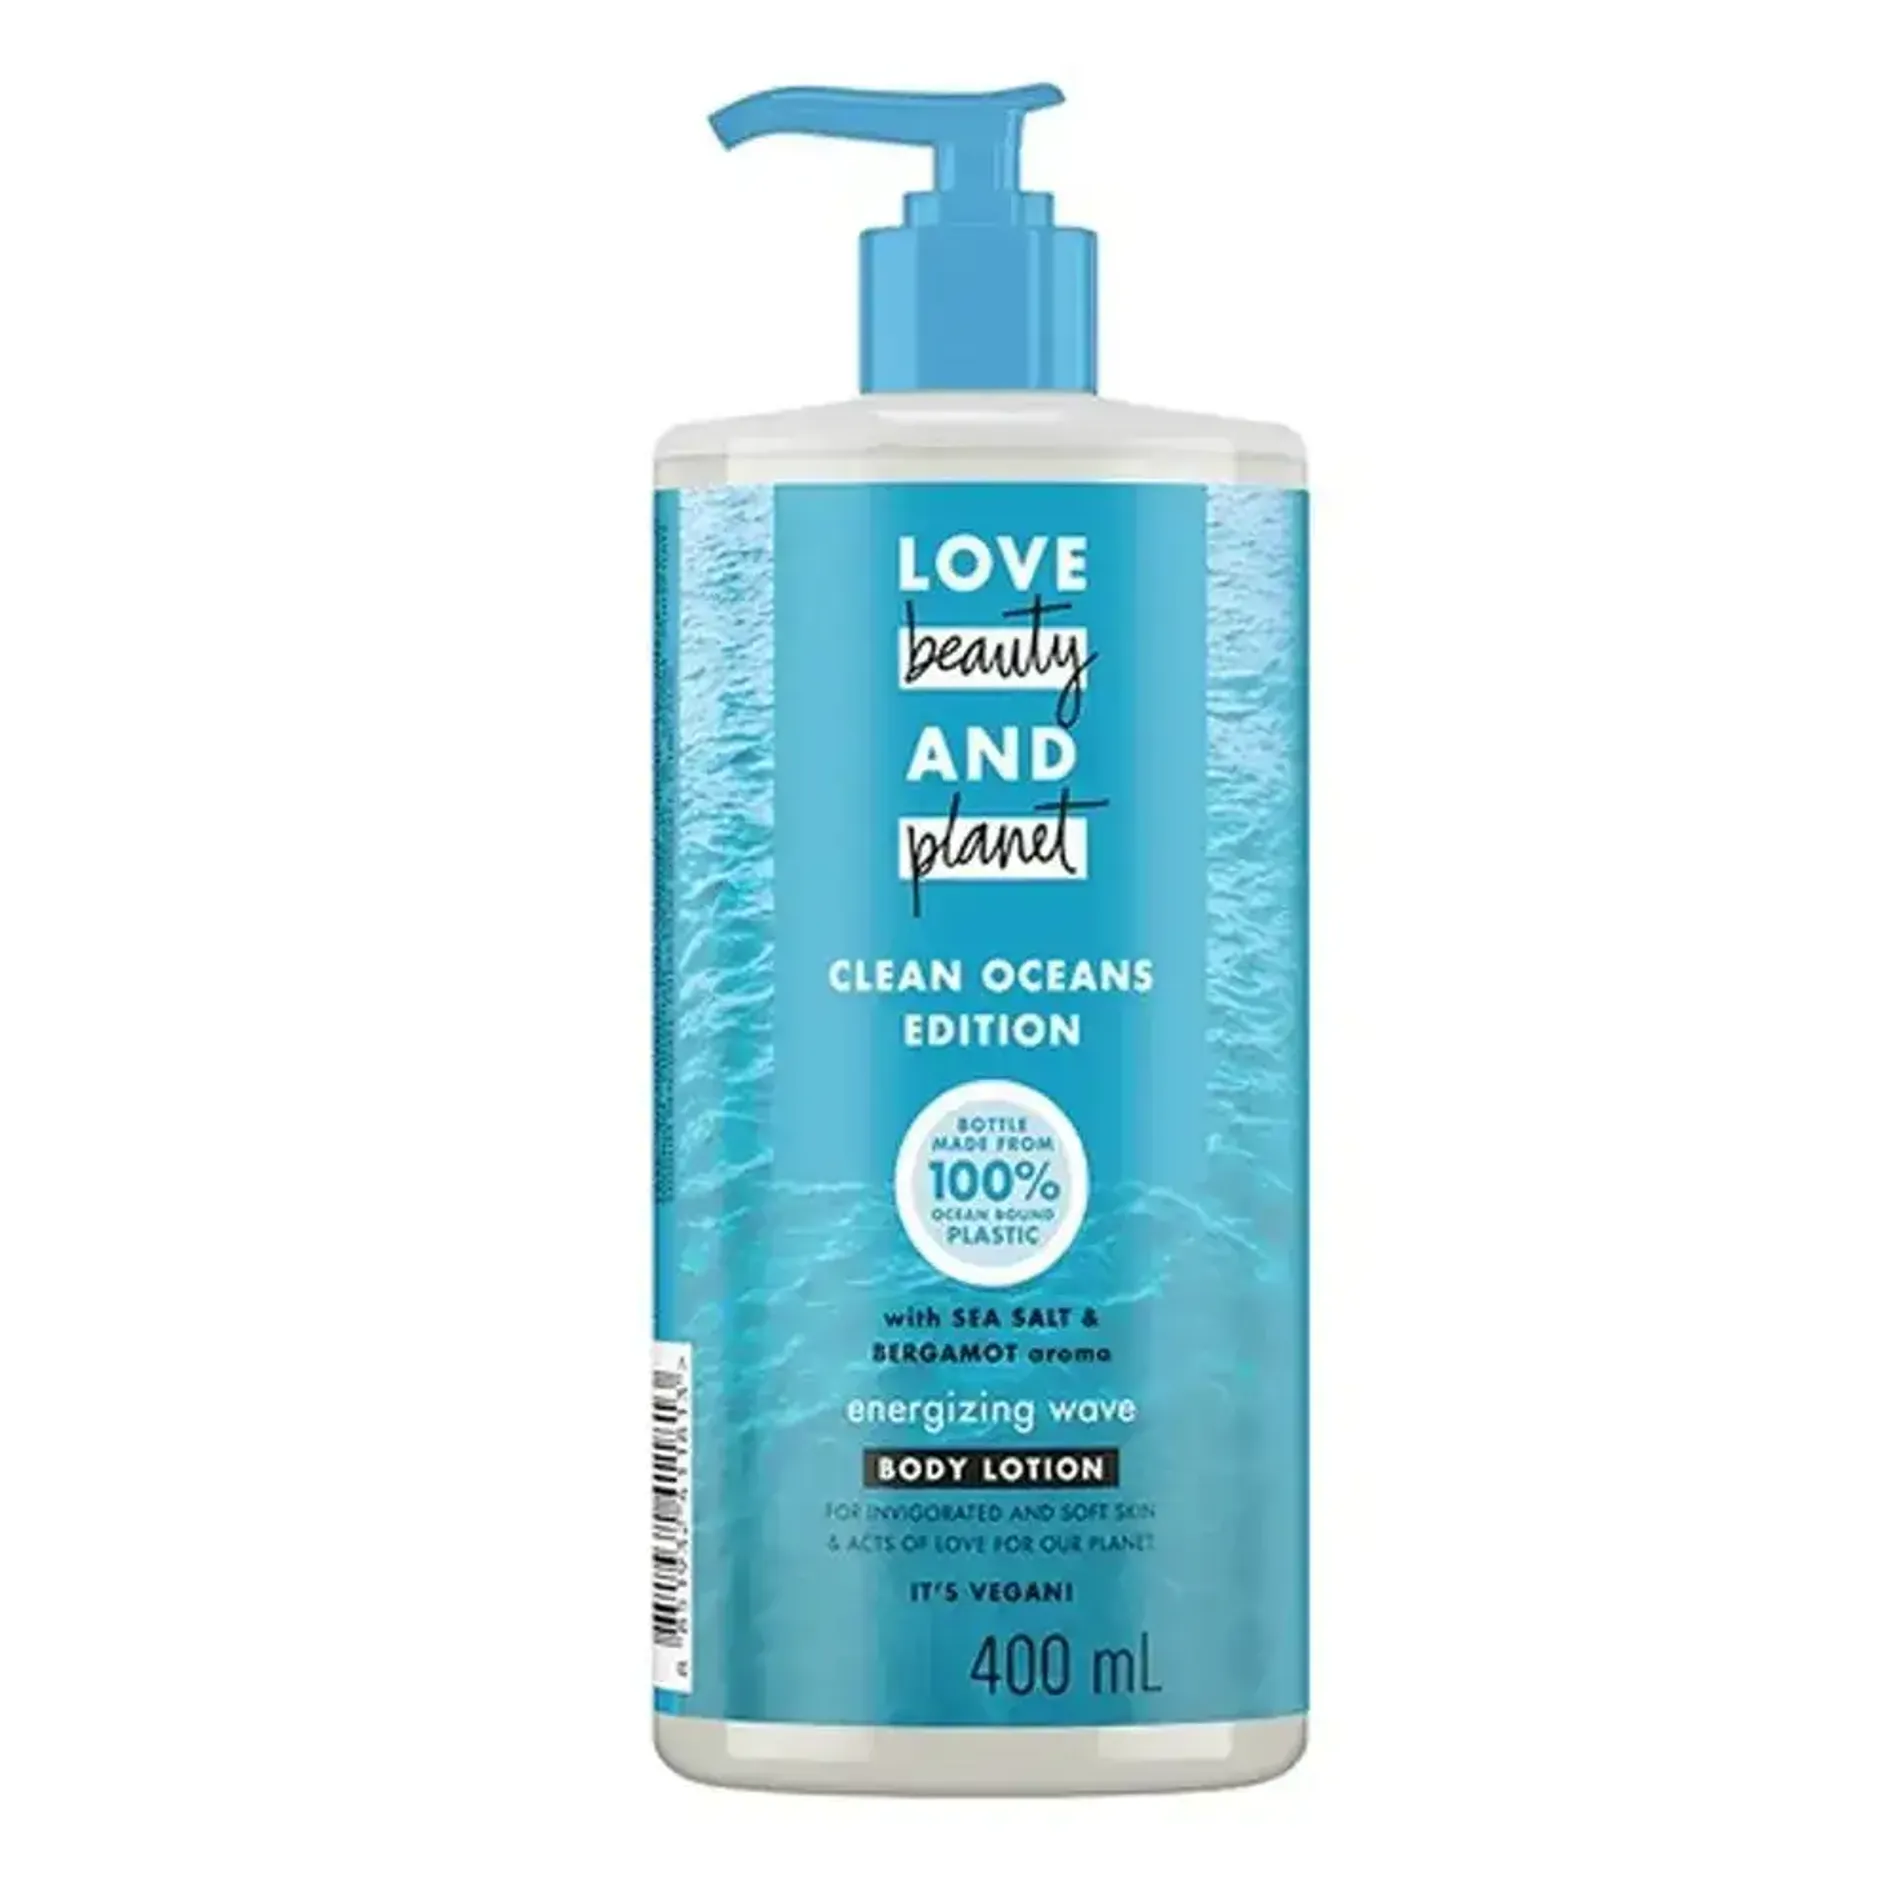 sua-duong-the-love-beauty-planet-energizing-wave-body-lotion-400ml-1